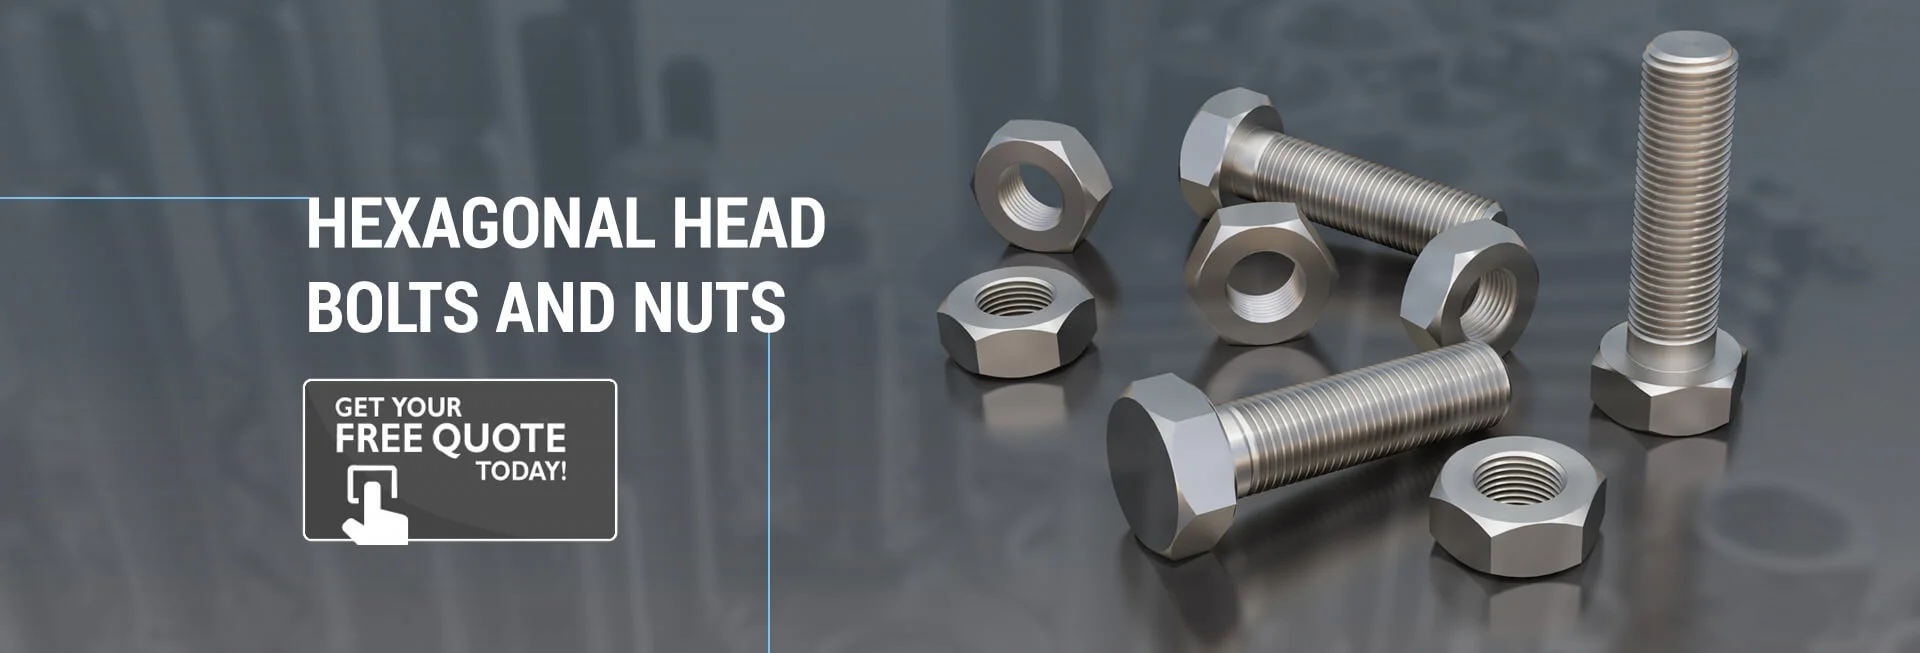 Leading Manufacturer and Supplier of Hexagonal Head Bolts and Nuts, Stainless Steel Hex Bolts, Stainless Steel Hex Nuts